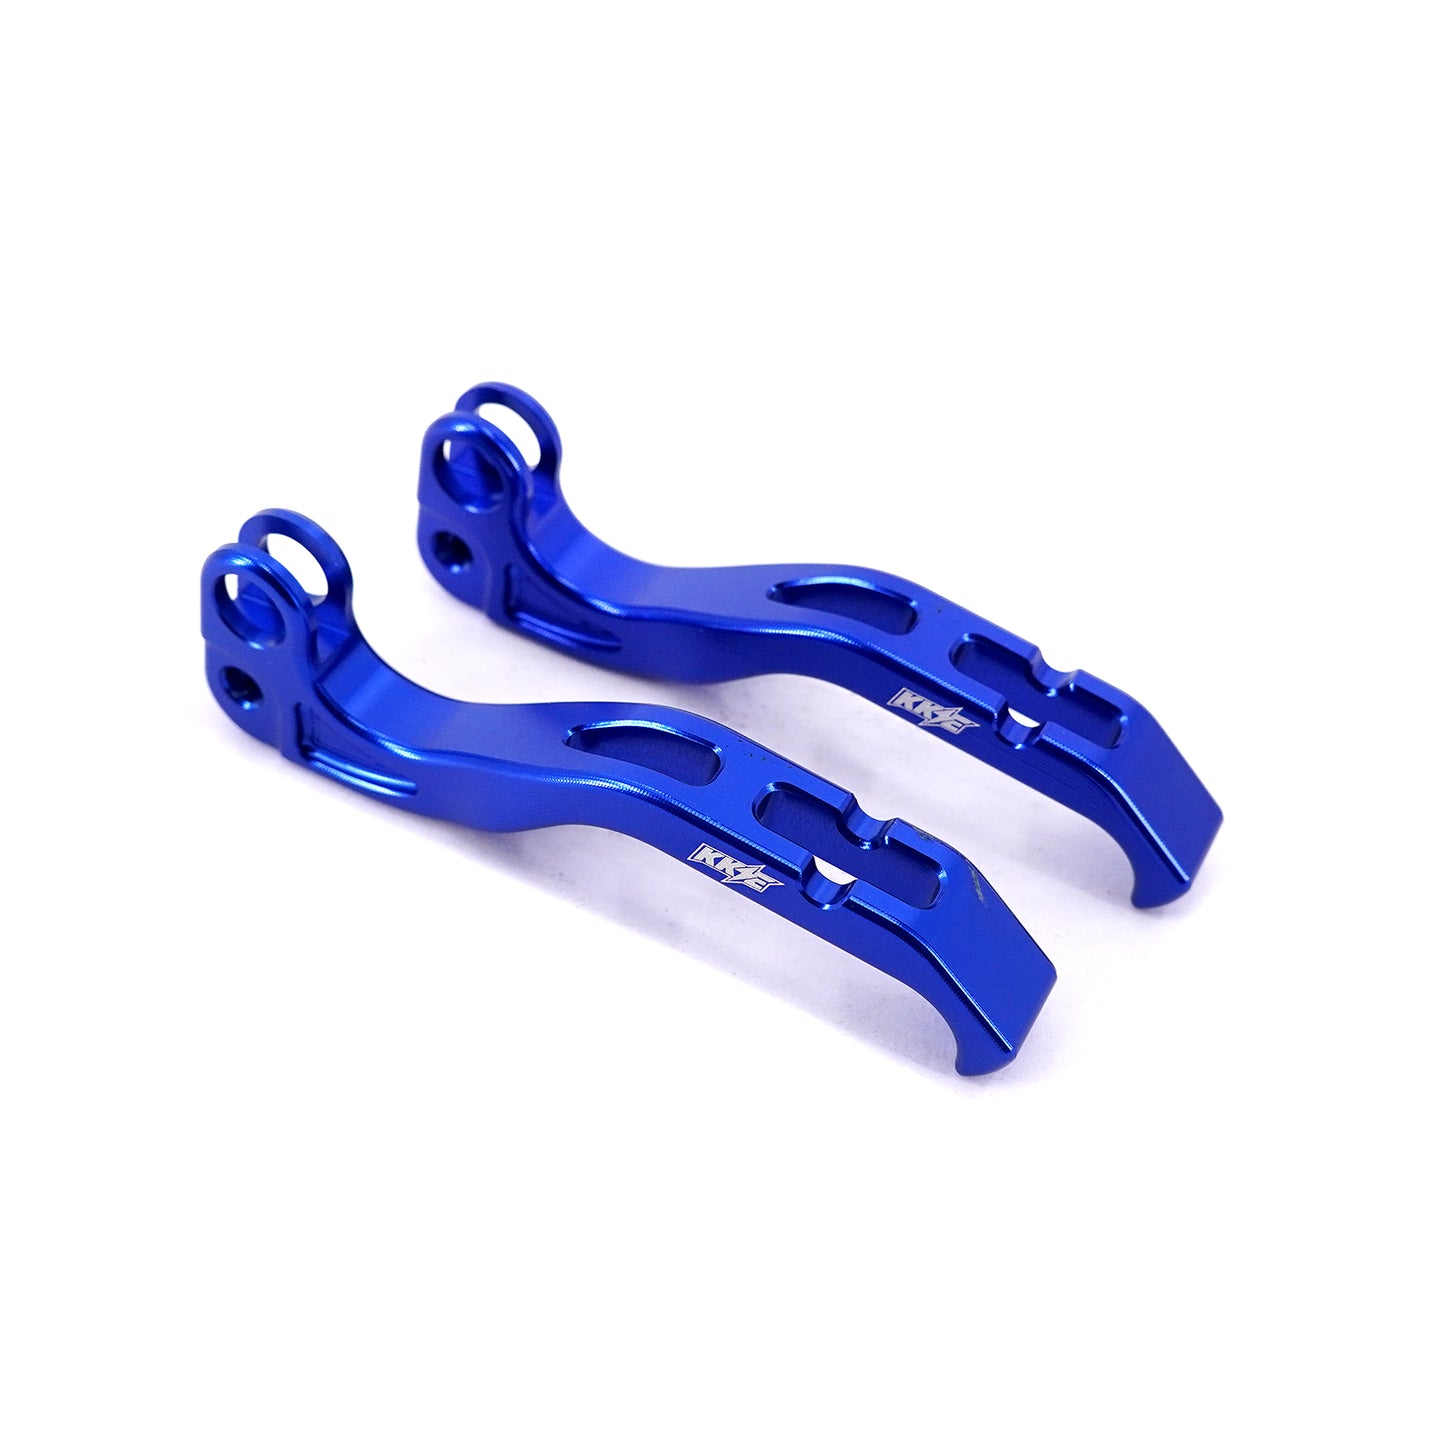 KKE Aluminum Brake Levers Fit Talaria Sting MX3 Different Color Available